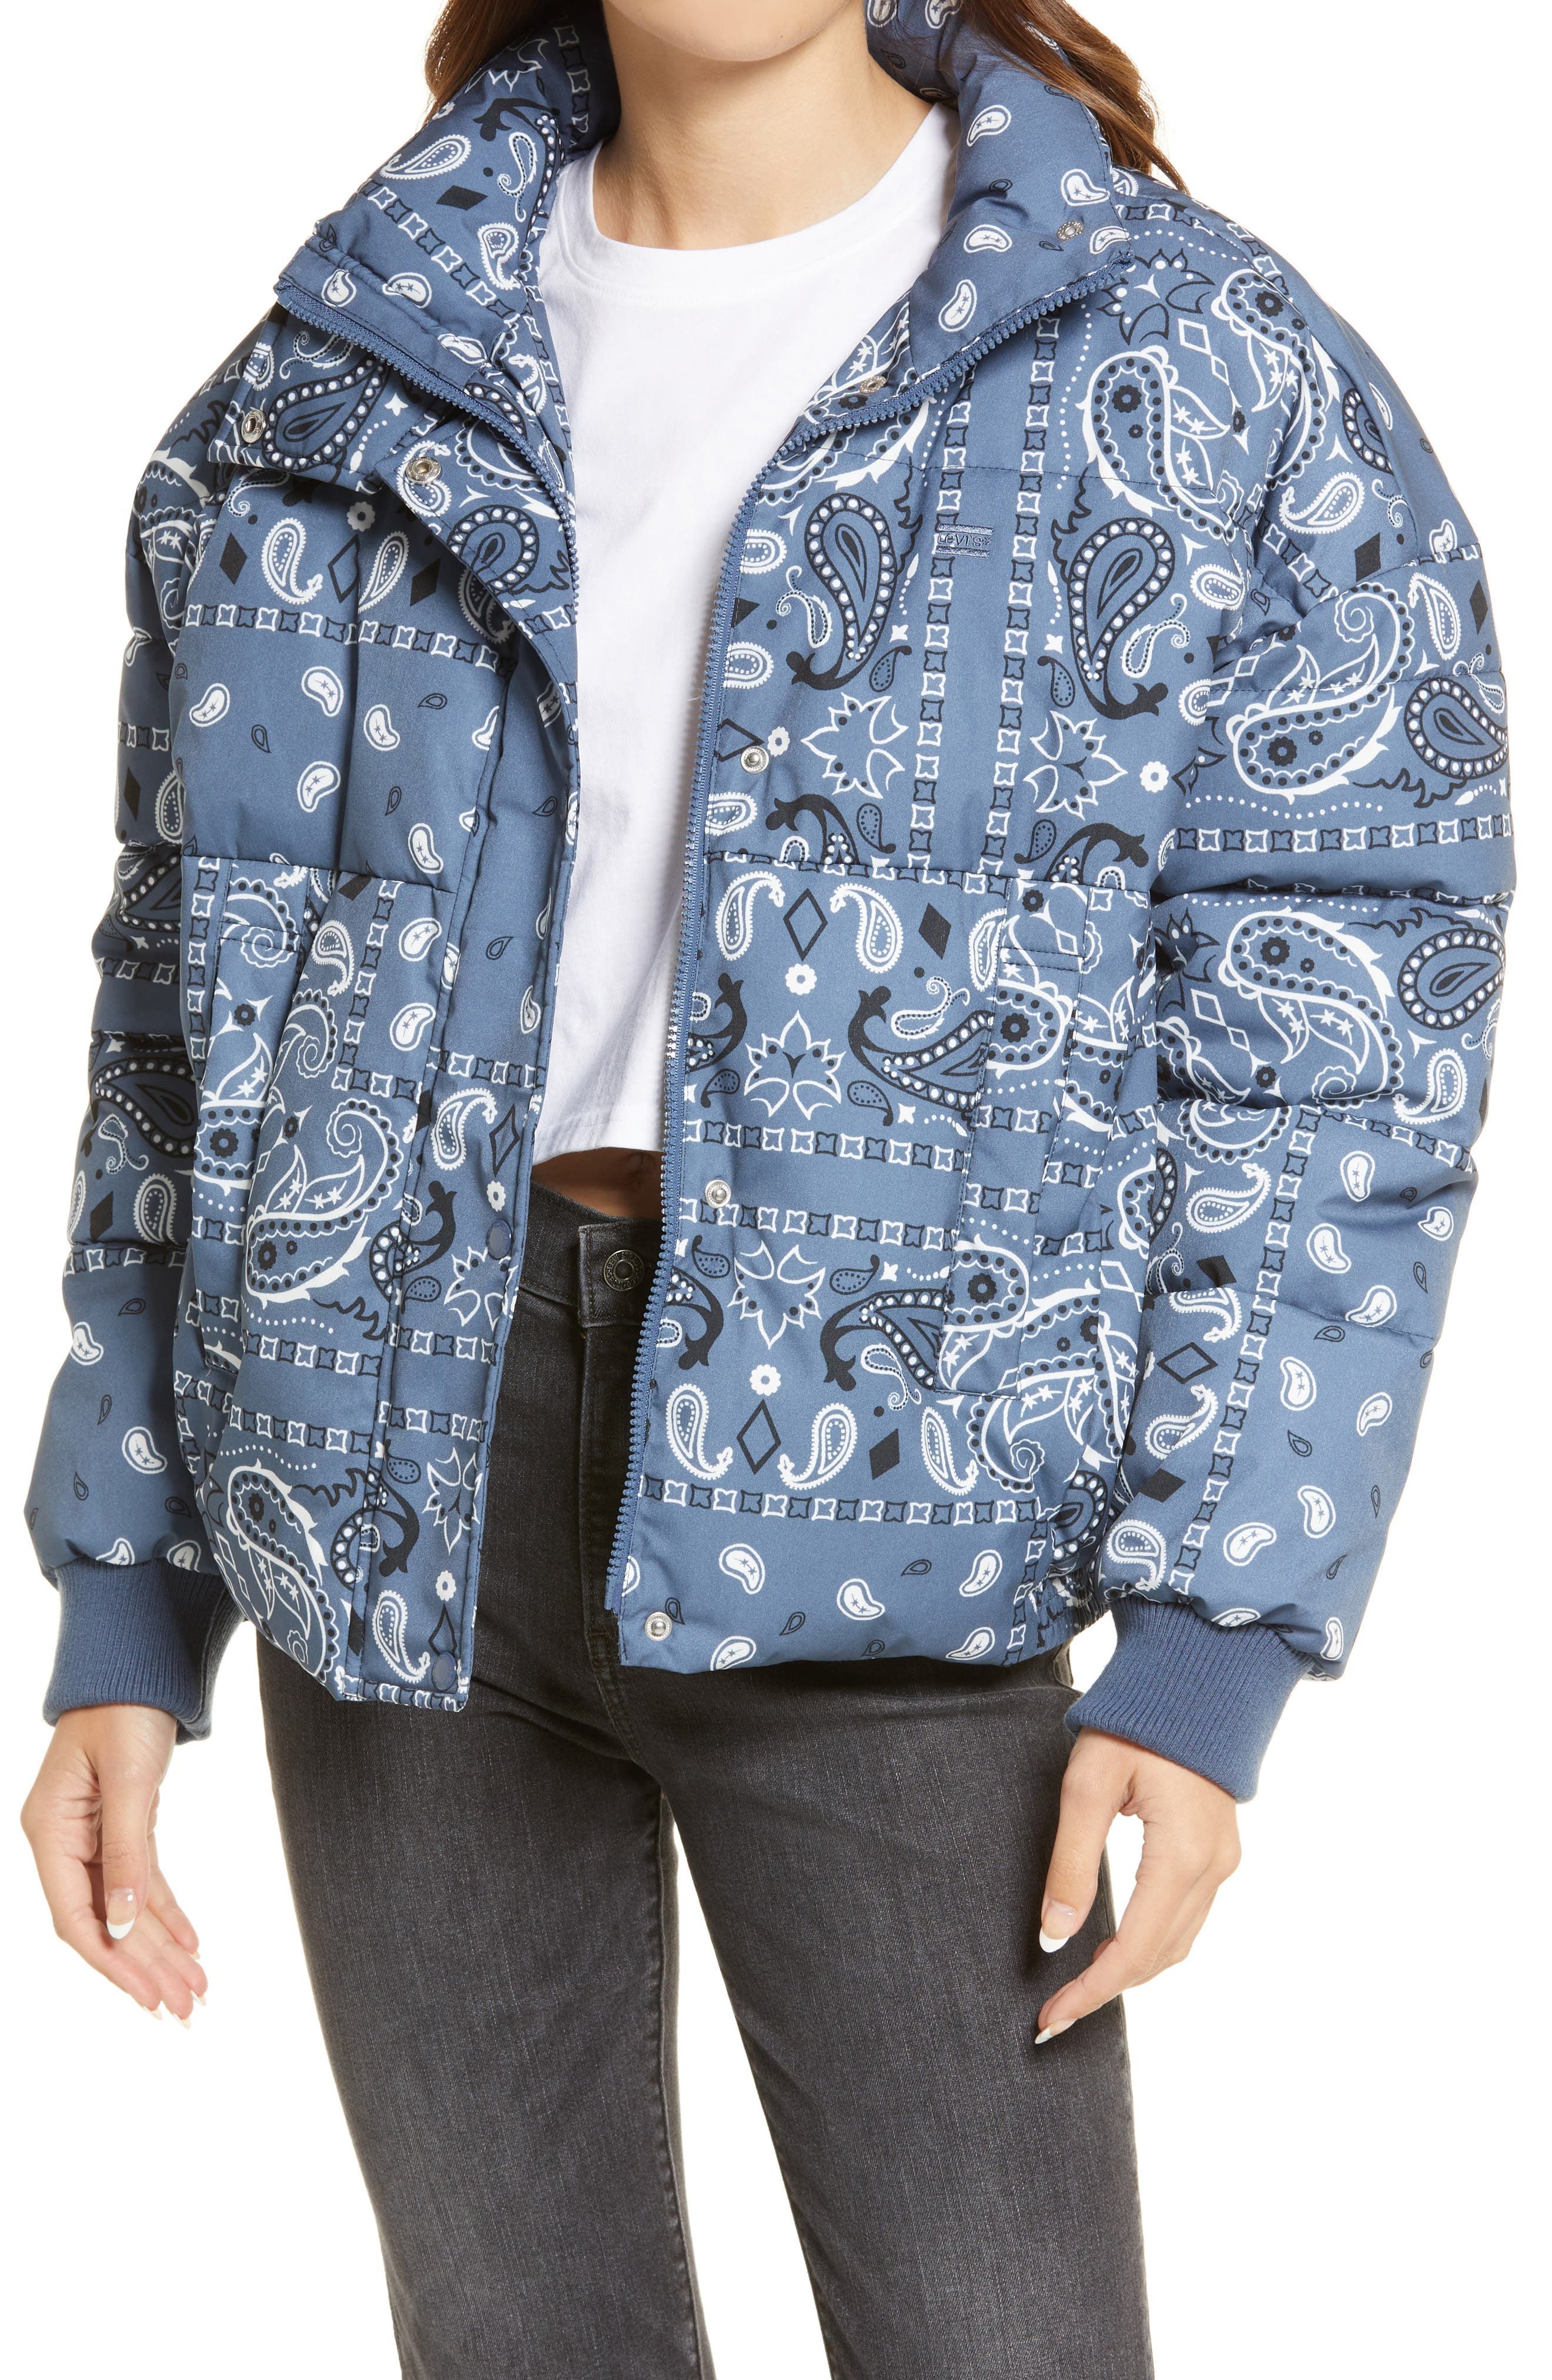 20 Stylish Puffer Jackets for Women 2022 - Top Women's Quilted, Parka Coats